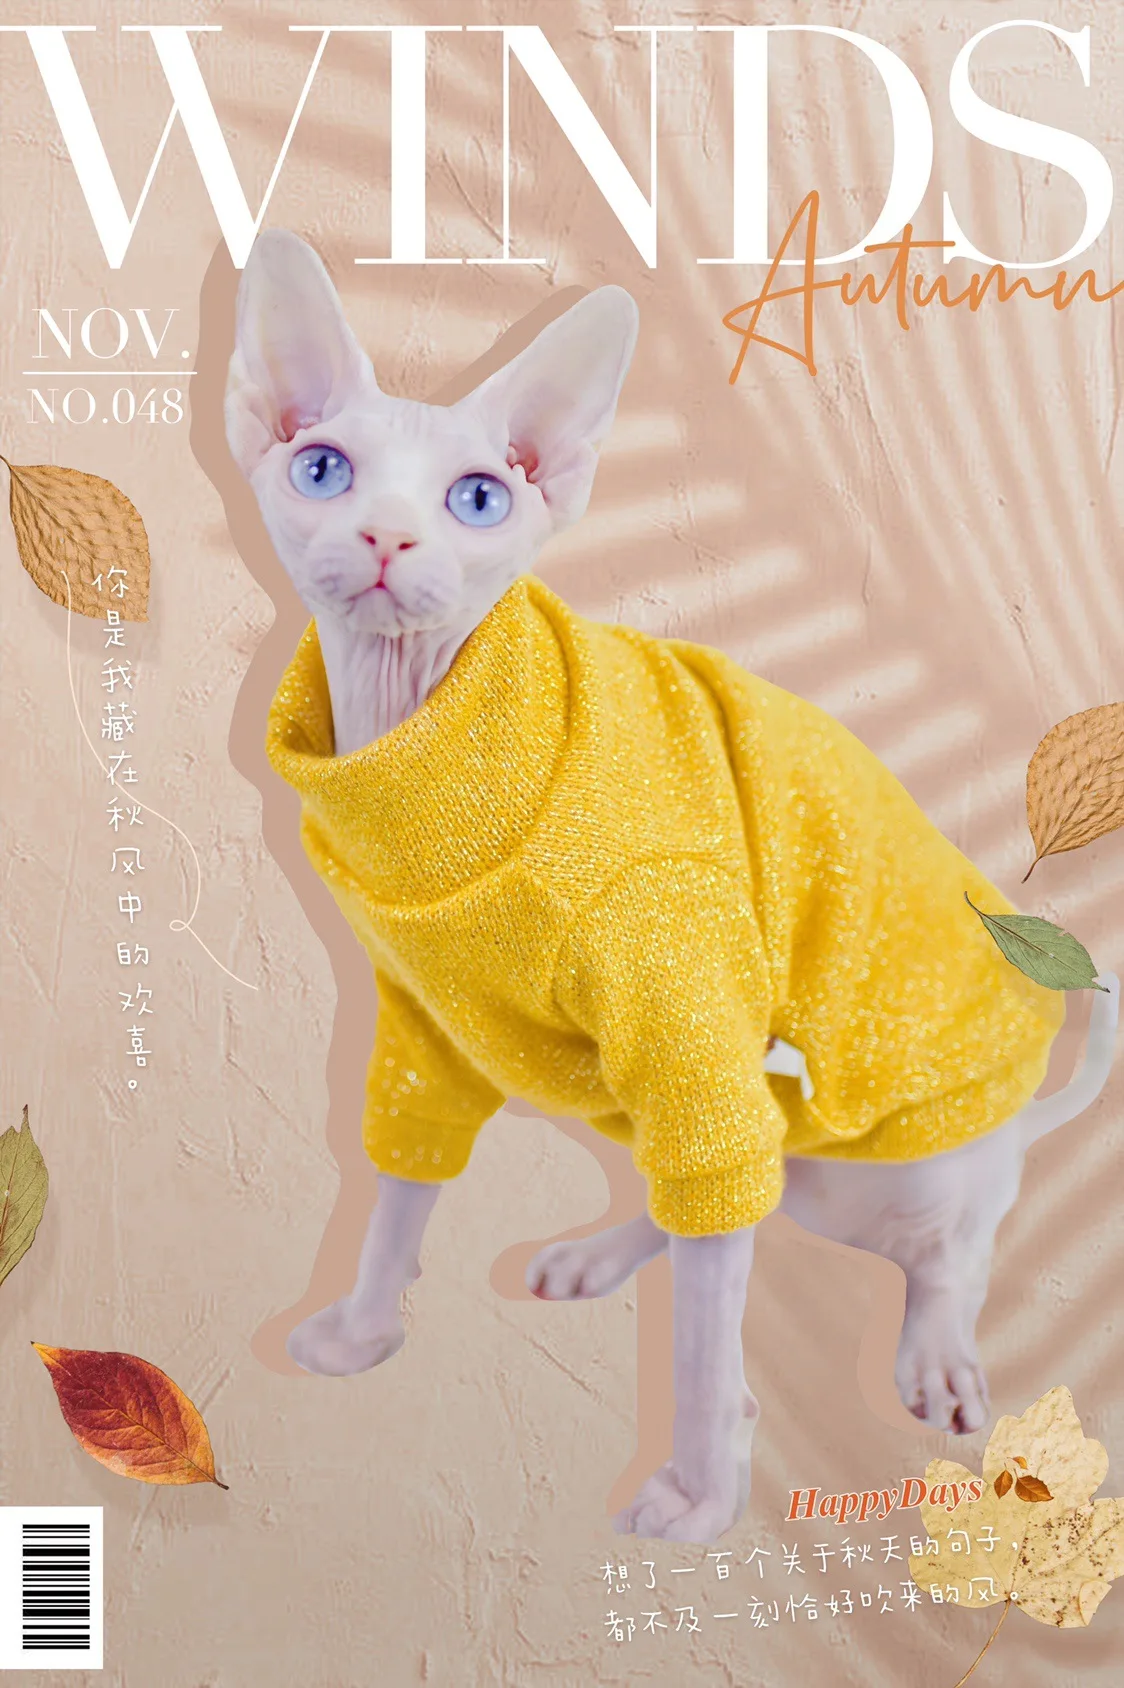 

Sphinx Devon Rex Hairless Cat Clothes Clothing for Cats T-shirt Sweater Shining Silk Is Not Very Thick but It Looks Really Nice